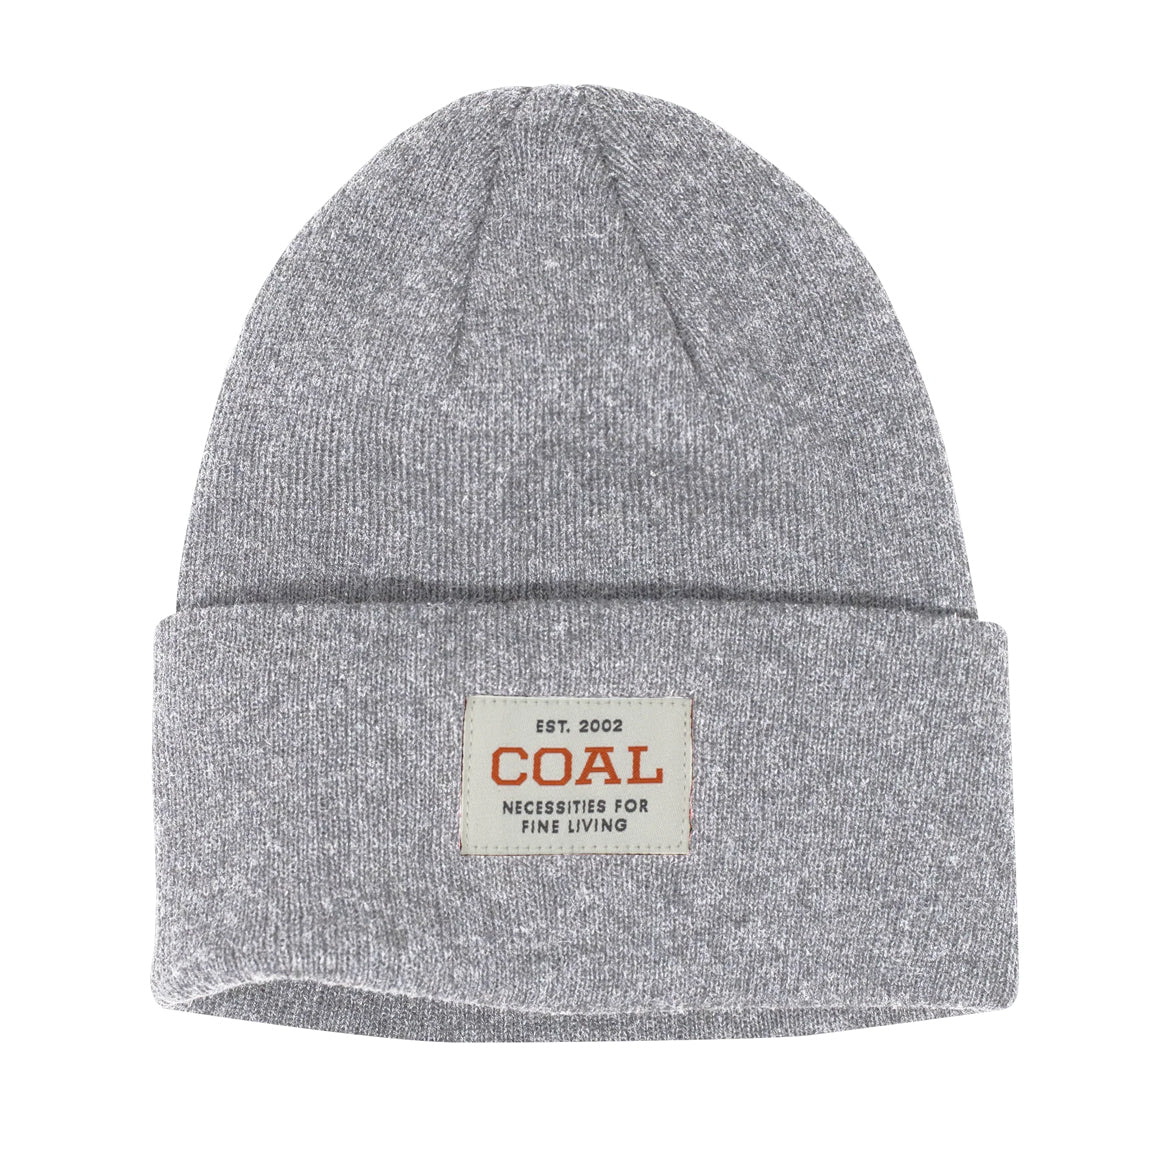 The Recycled Wool Uniform Knit Cuff Beanie